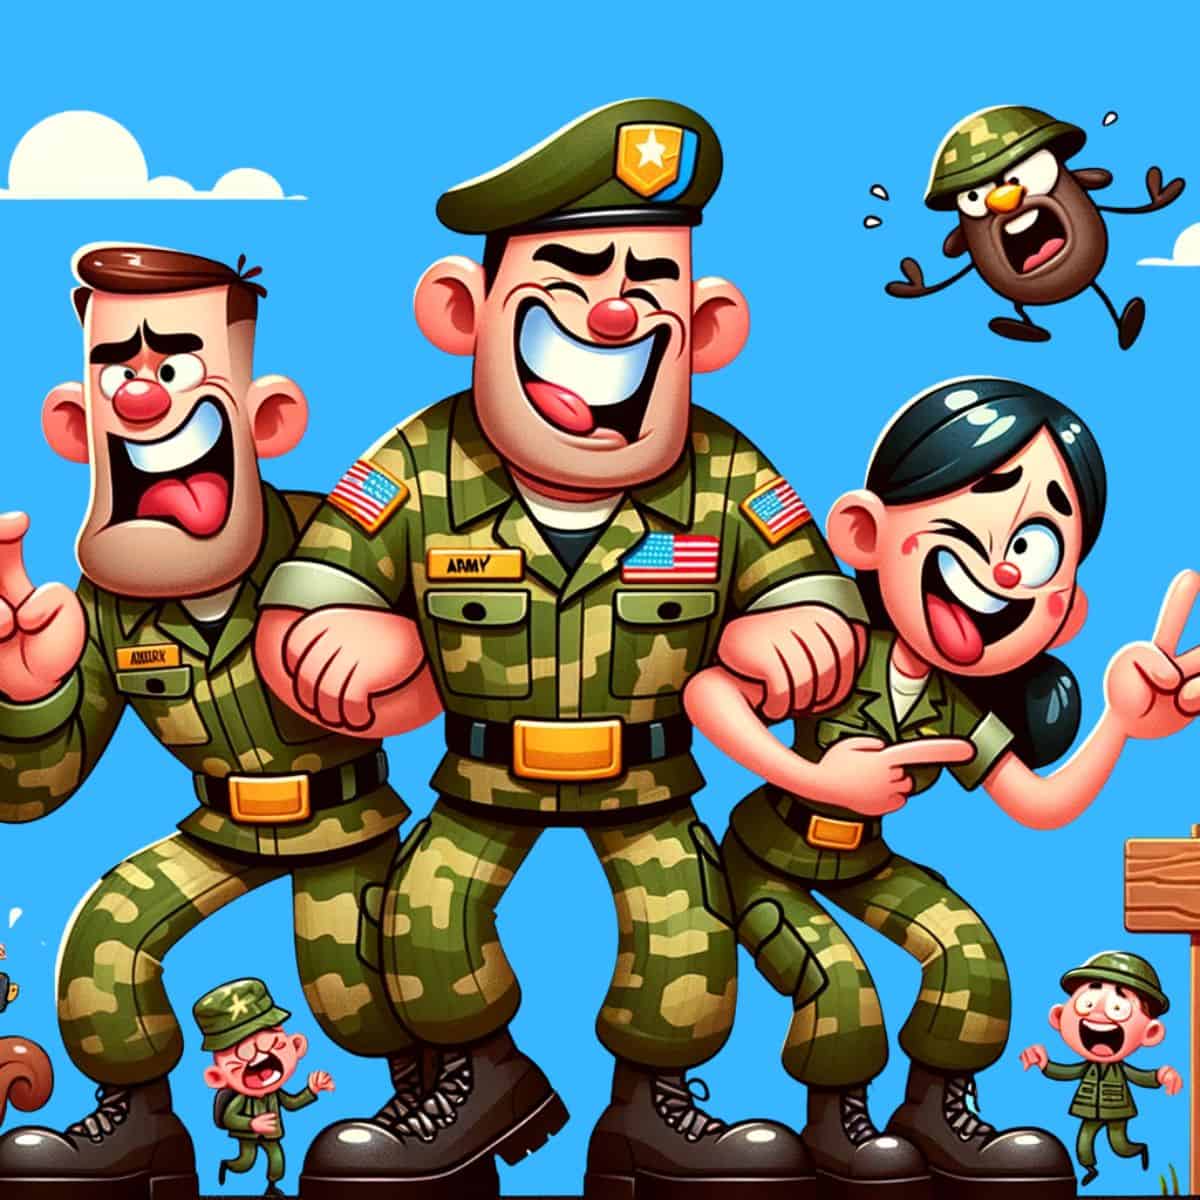 A cartoon graphic of 3 laughing army personal on a blue background.